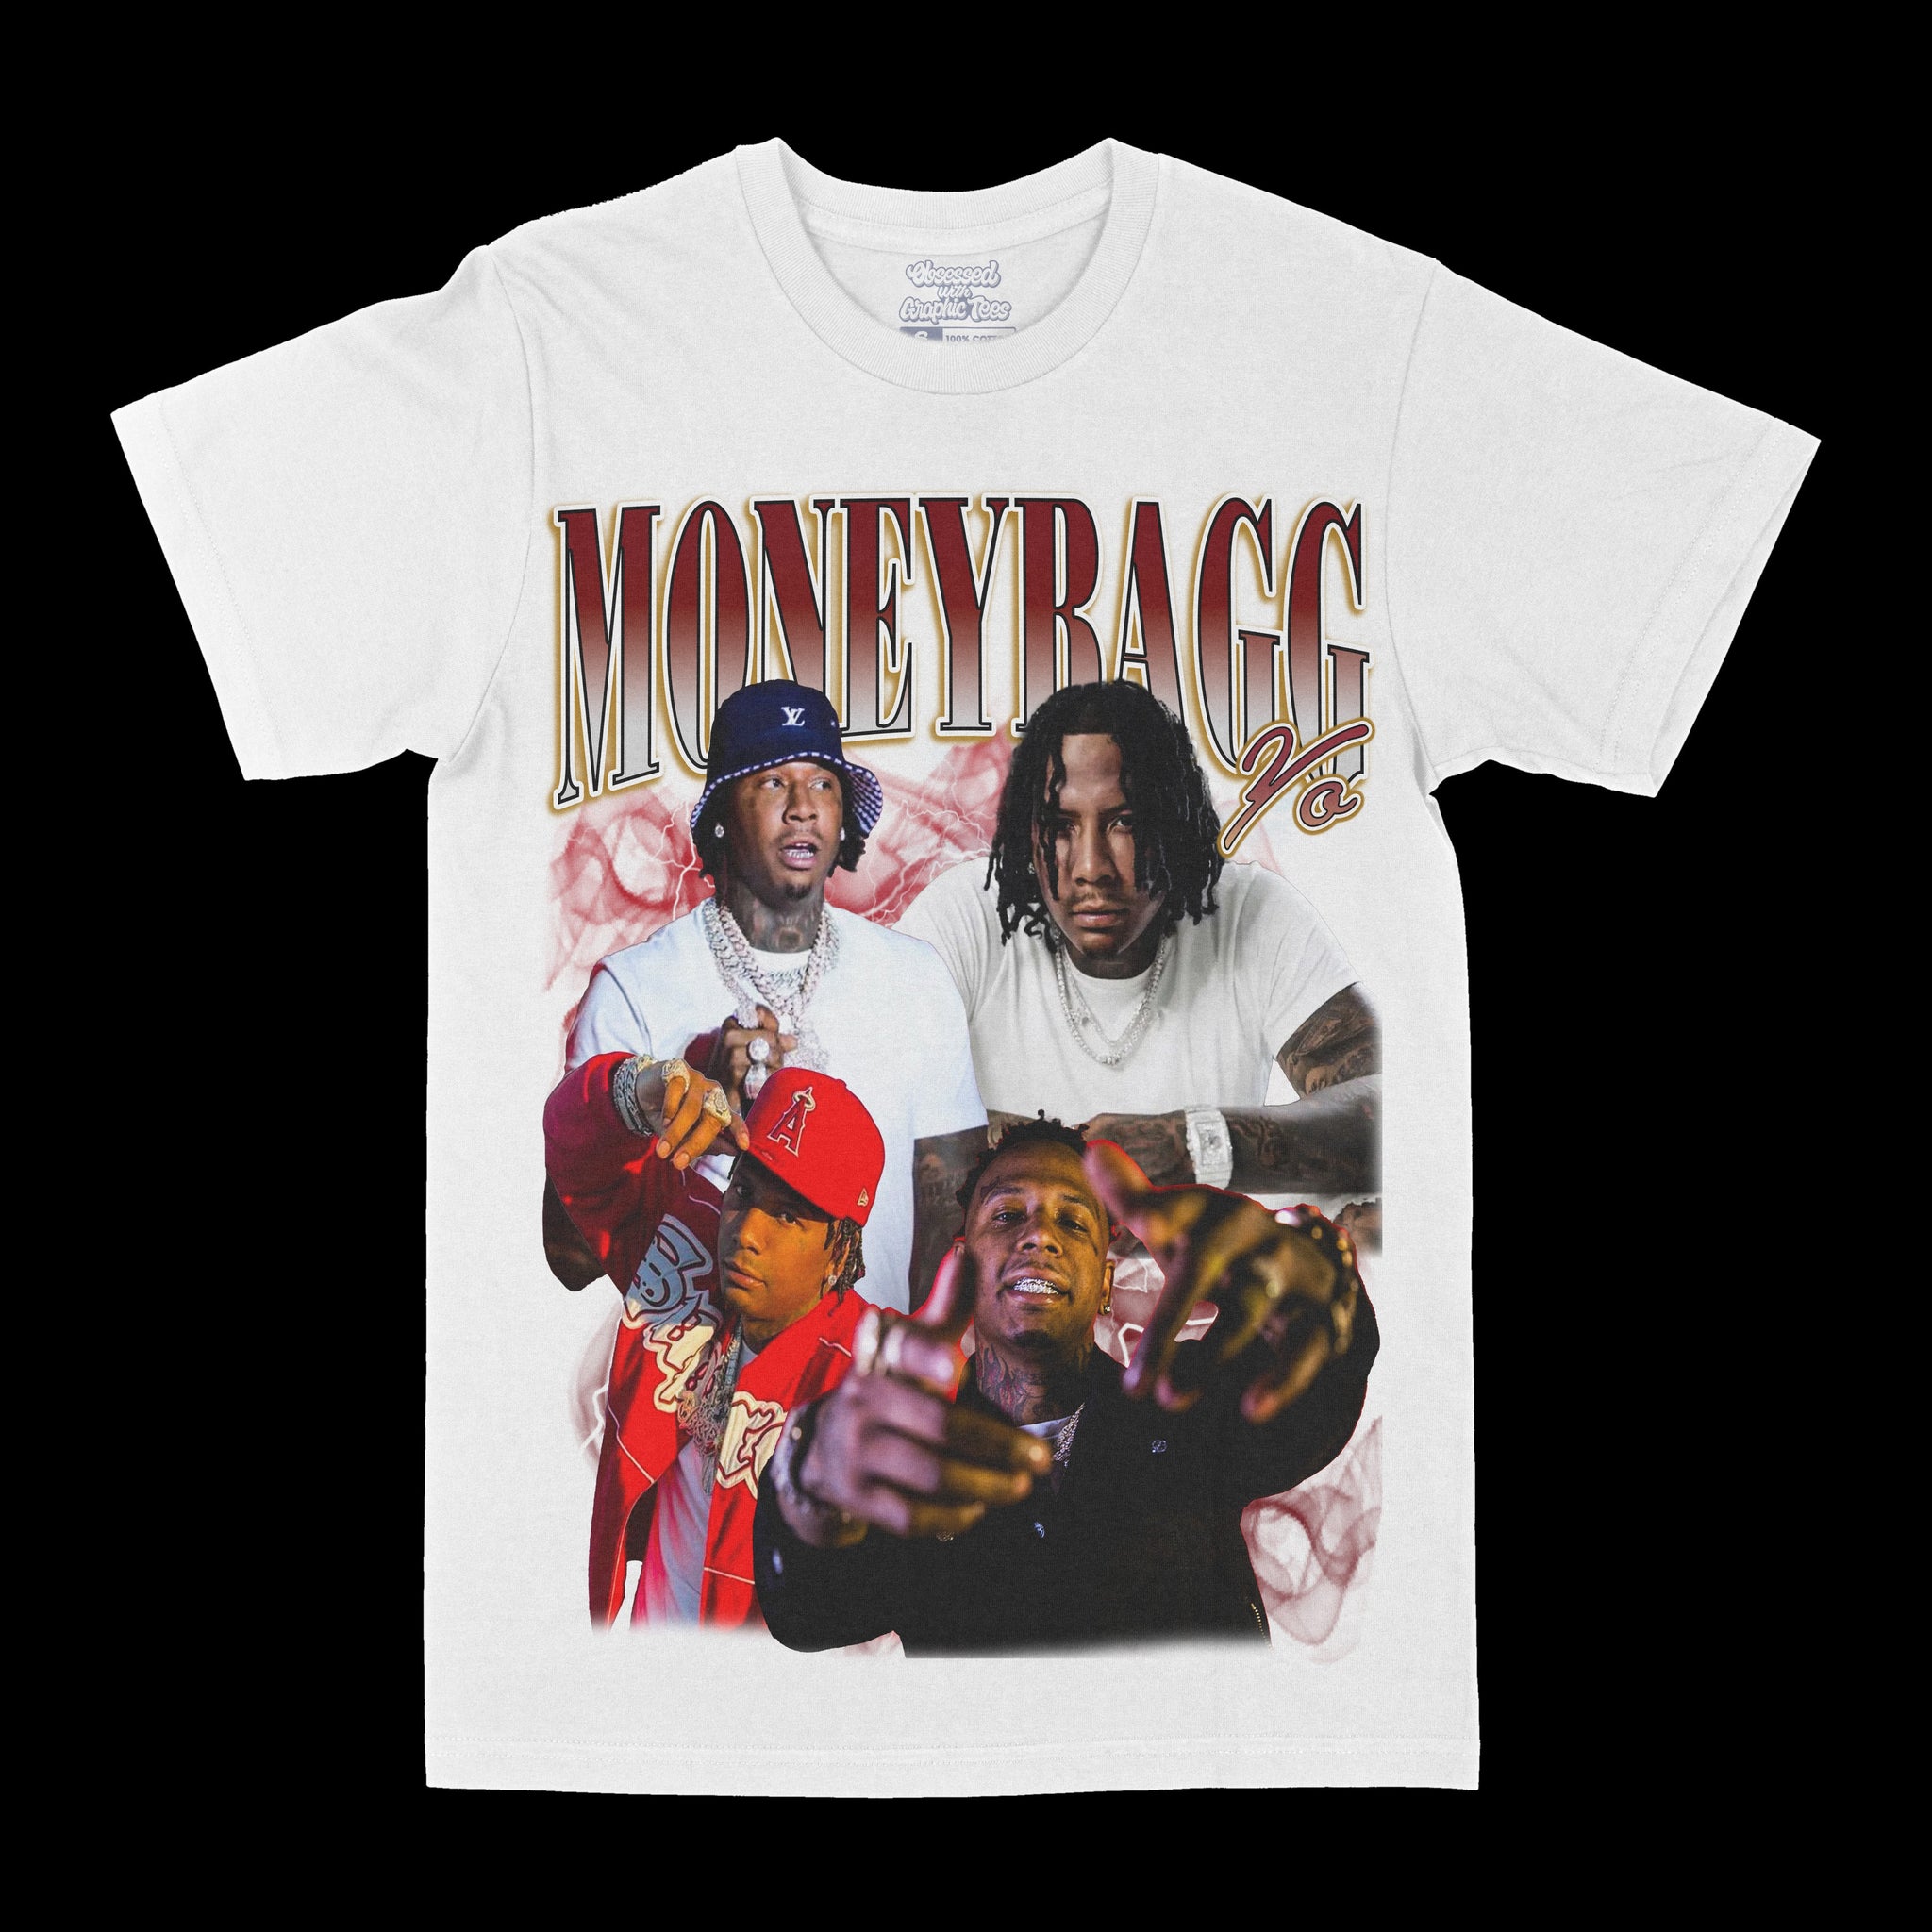 Moneybagg Yo "Red" Graphic Tee